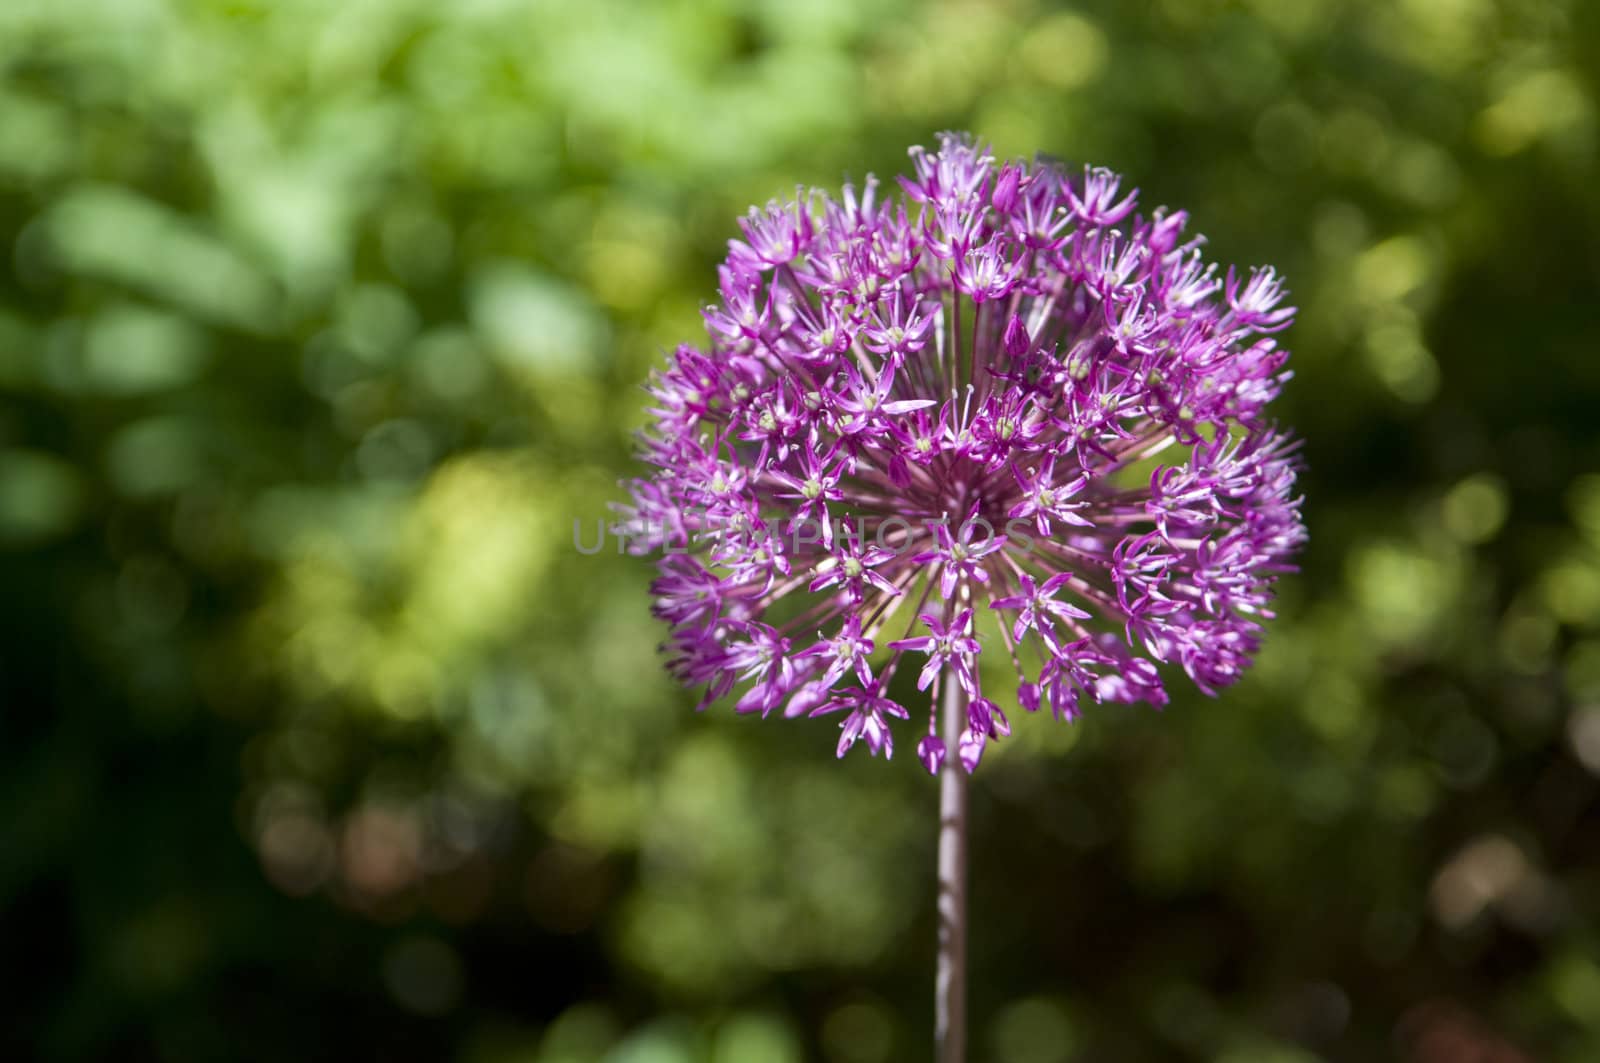 Selective focus on the foreground portion of a Allium pink colored flower with green garden background